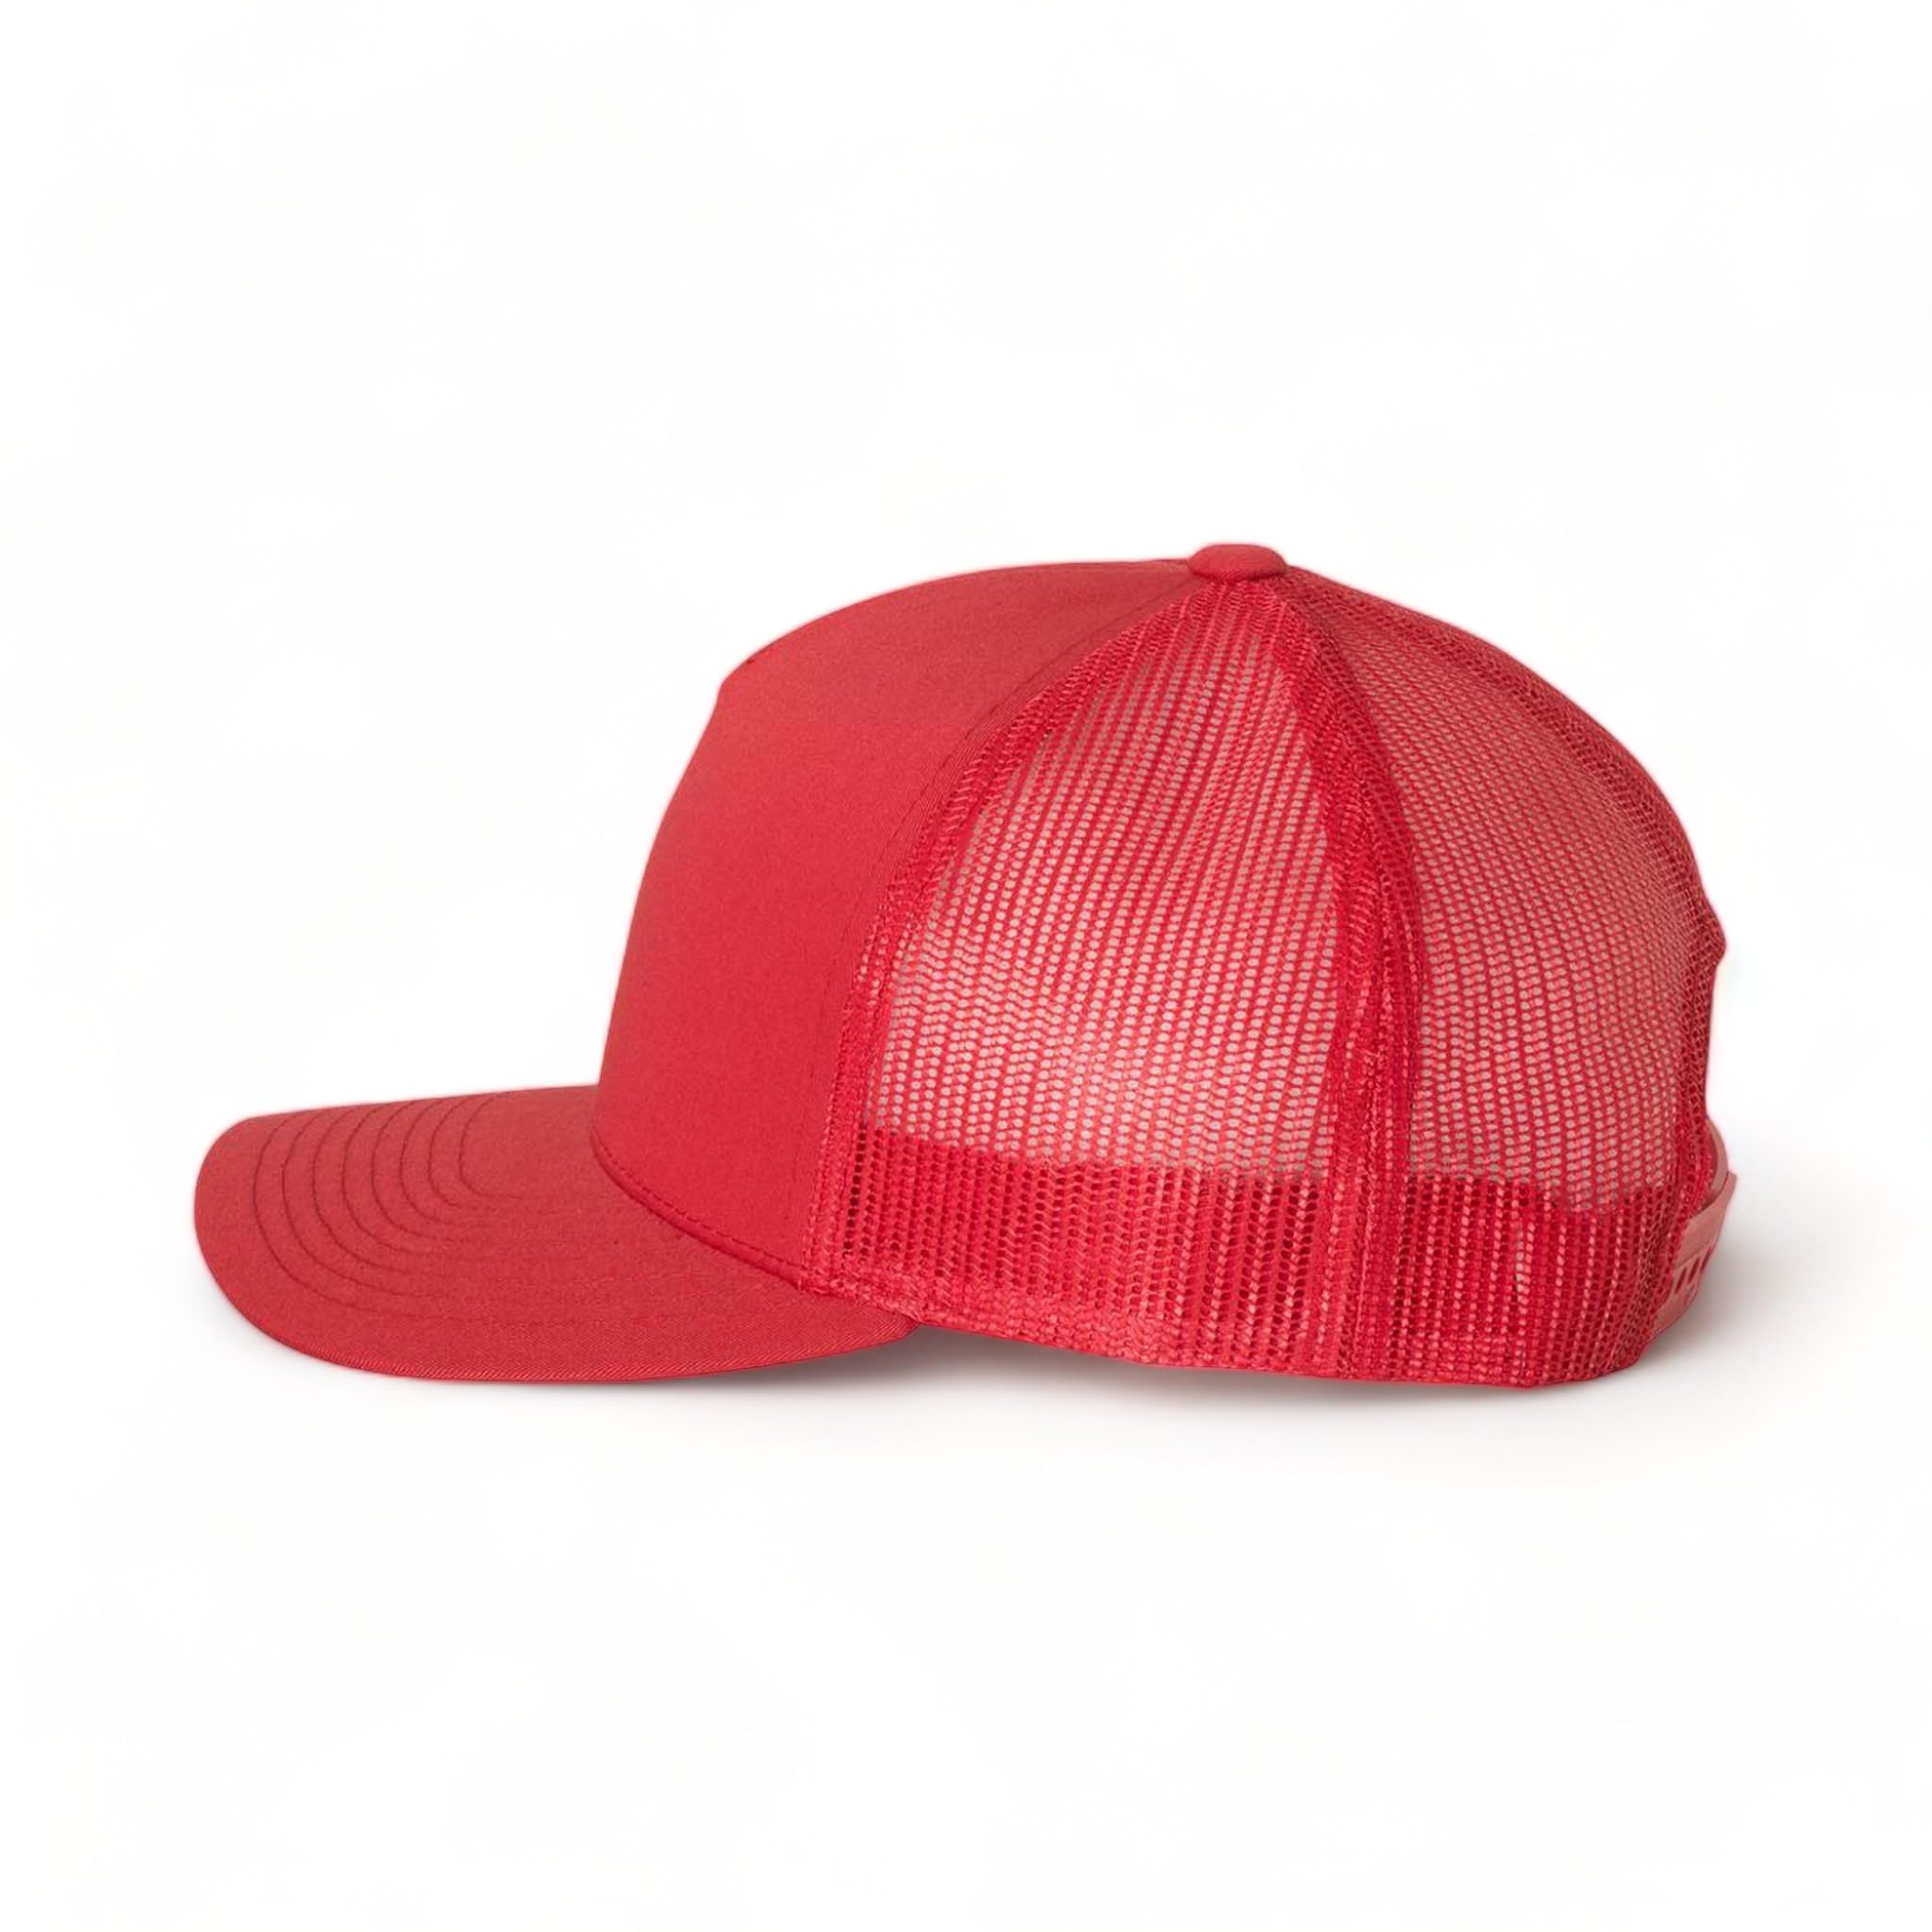 Side view of YP Classics 6506 custom hat in red